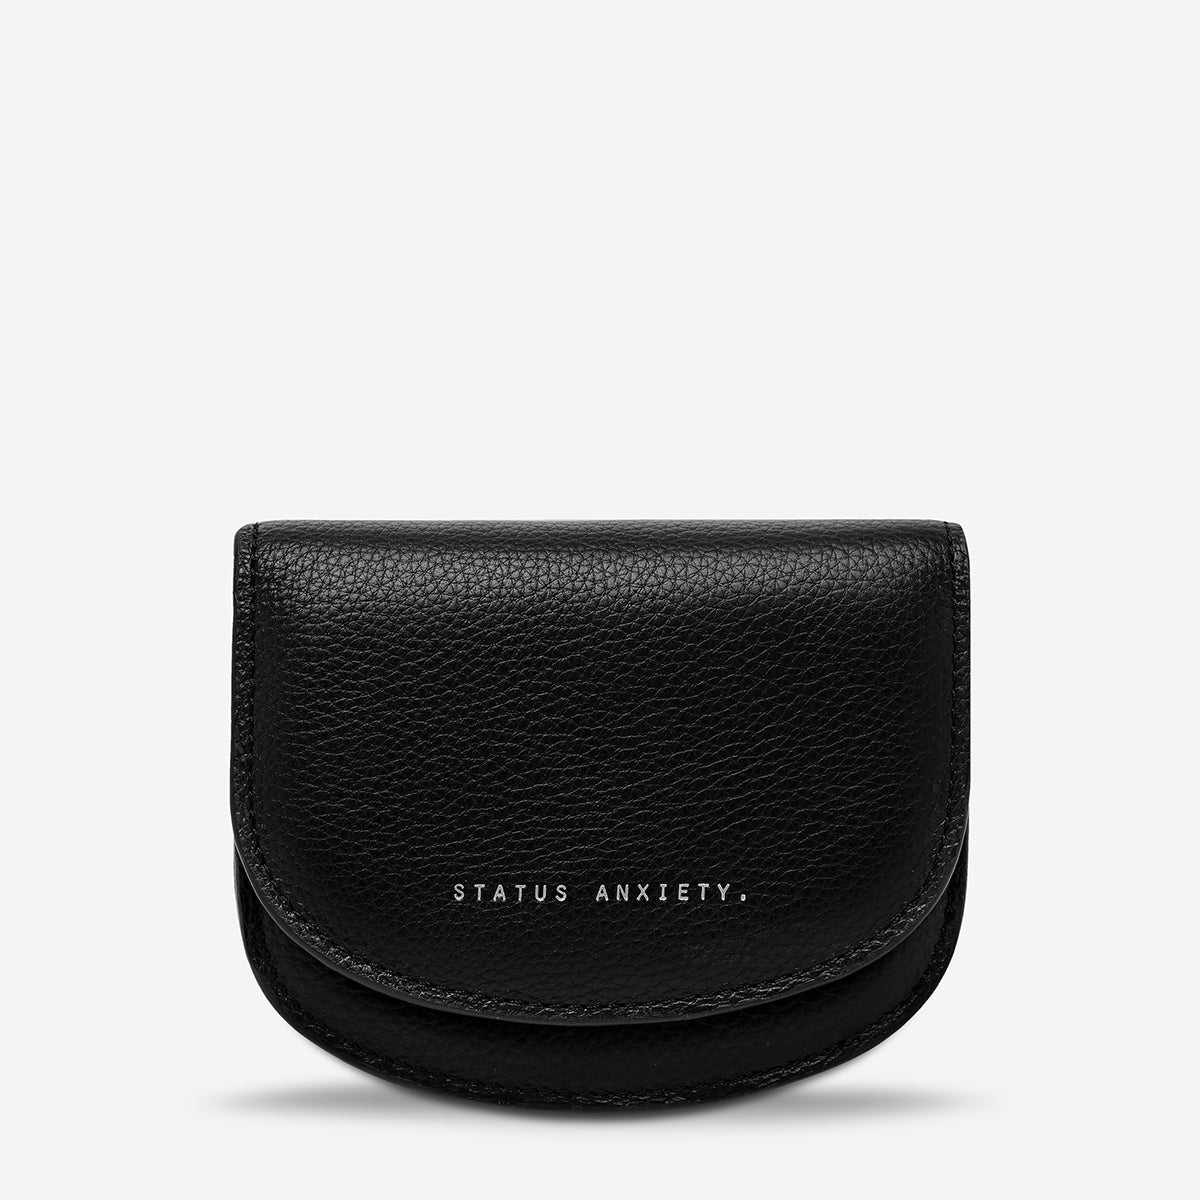 Status Anxiety Us for now Women's Leather Wallet Black